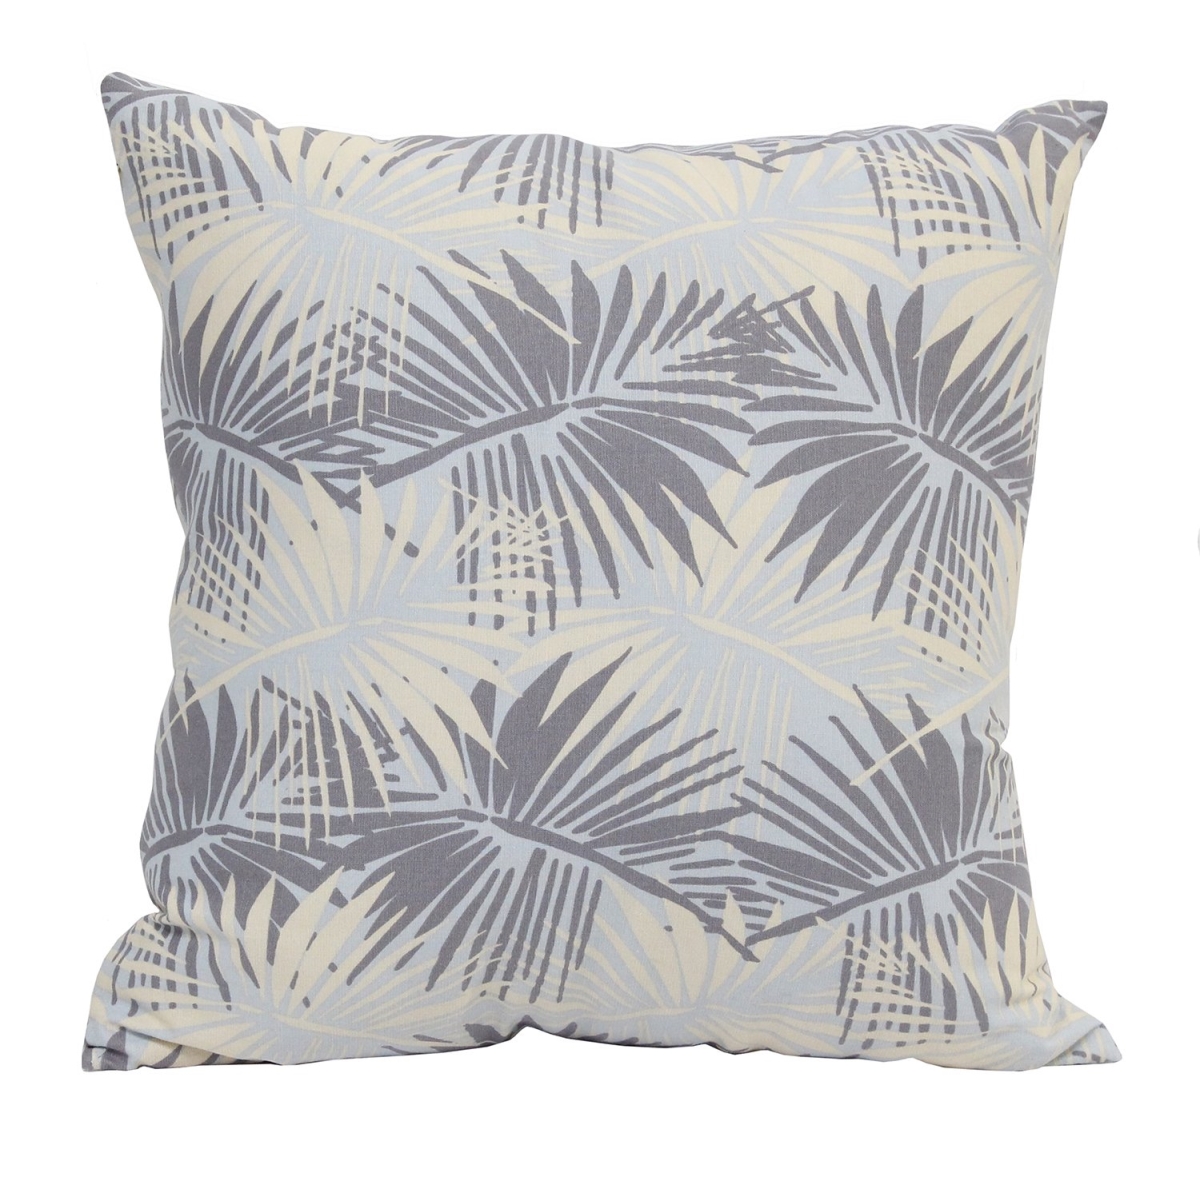 Home Roots Beddings 329361 Tropical Palm Pillow, Multicolor